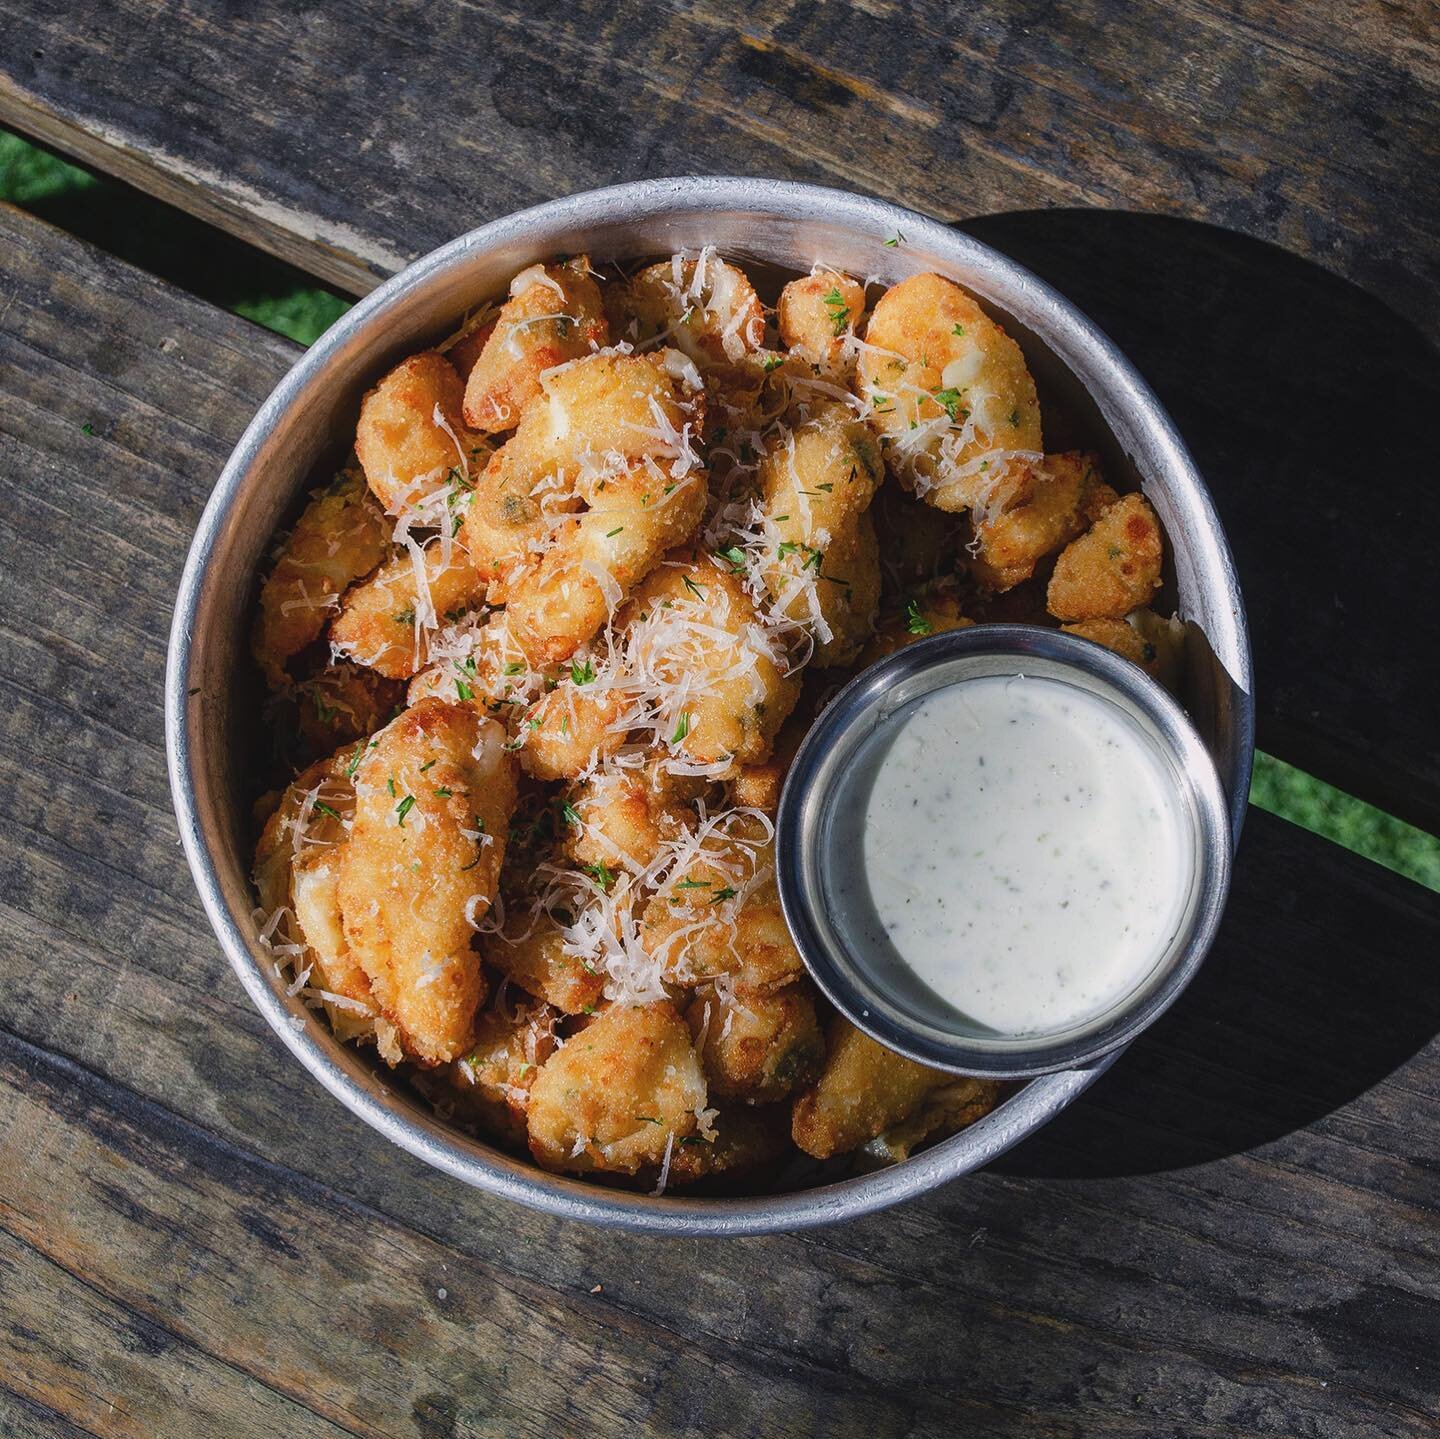 Hey, hosers! We hear you like cheese, eh? Well you&rsquo;re gonna love a new addition to our menu &ndash; 𝙎𝙌𝙐𝙀𝘼𝙆𝙔 𝘾𝙃𝙀𝙀𝙎𝙀 !!🧀

These garlicky and herb-seasoned fried cheese curds are just the thing to snack on as you enjoy a couple-two-t